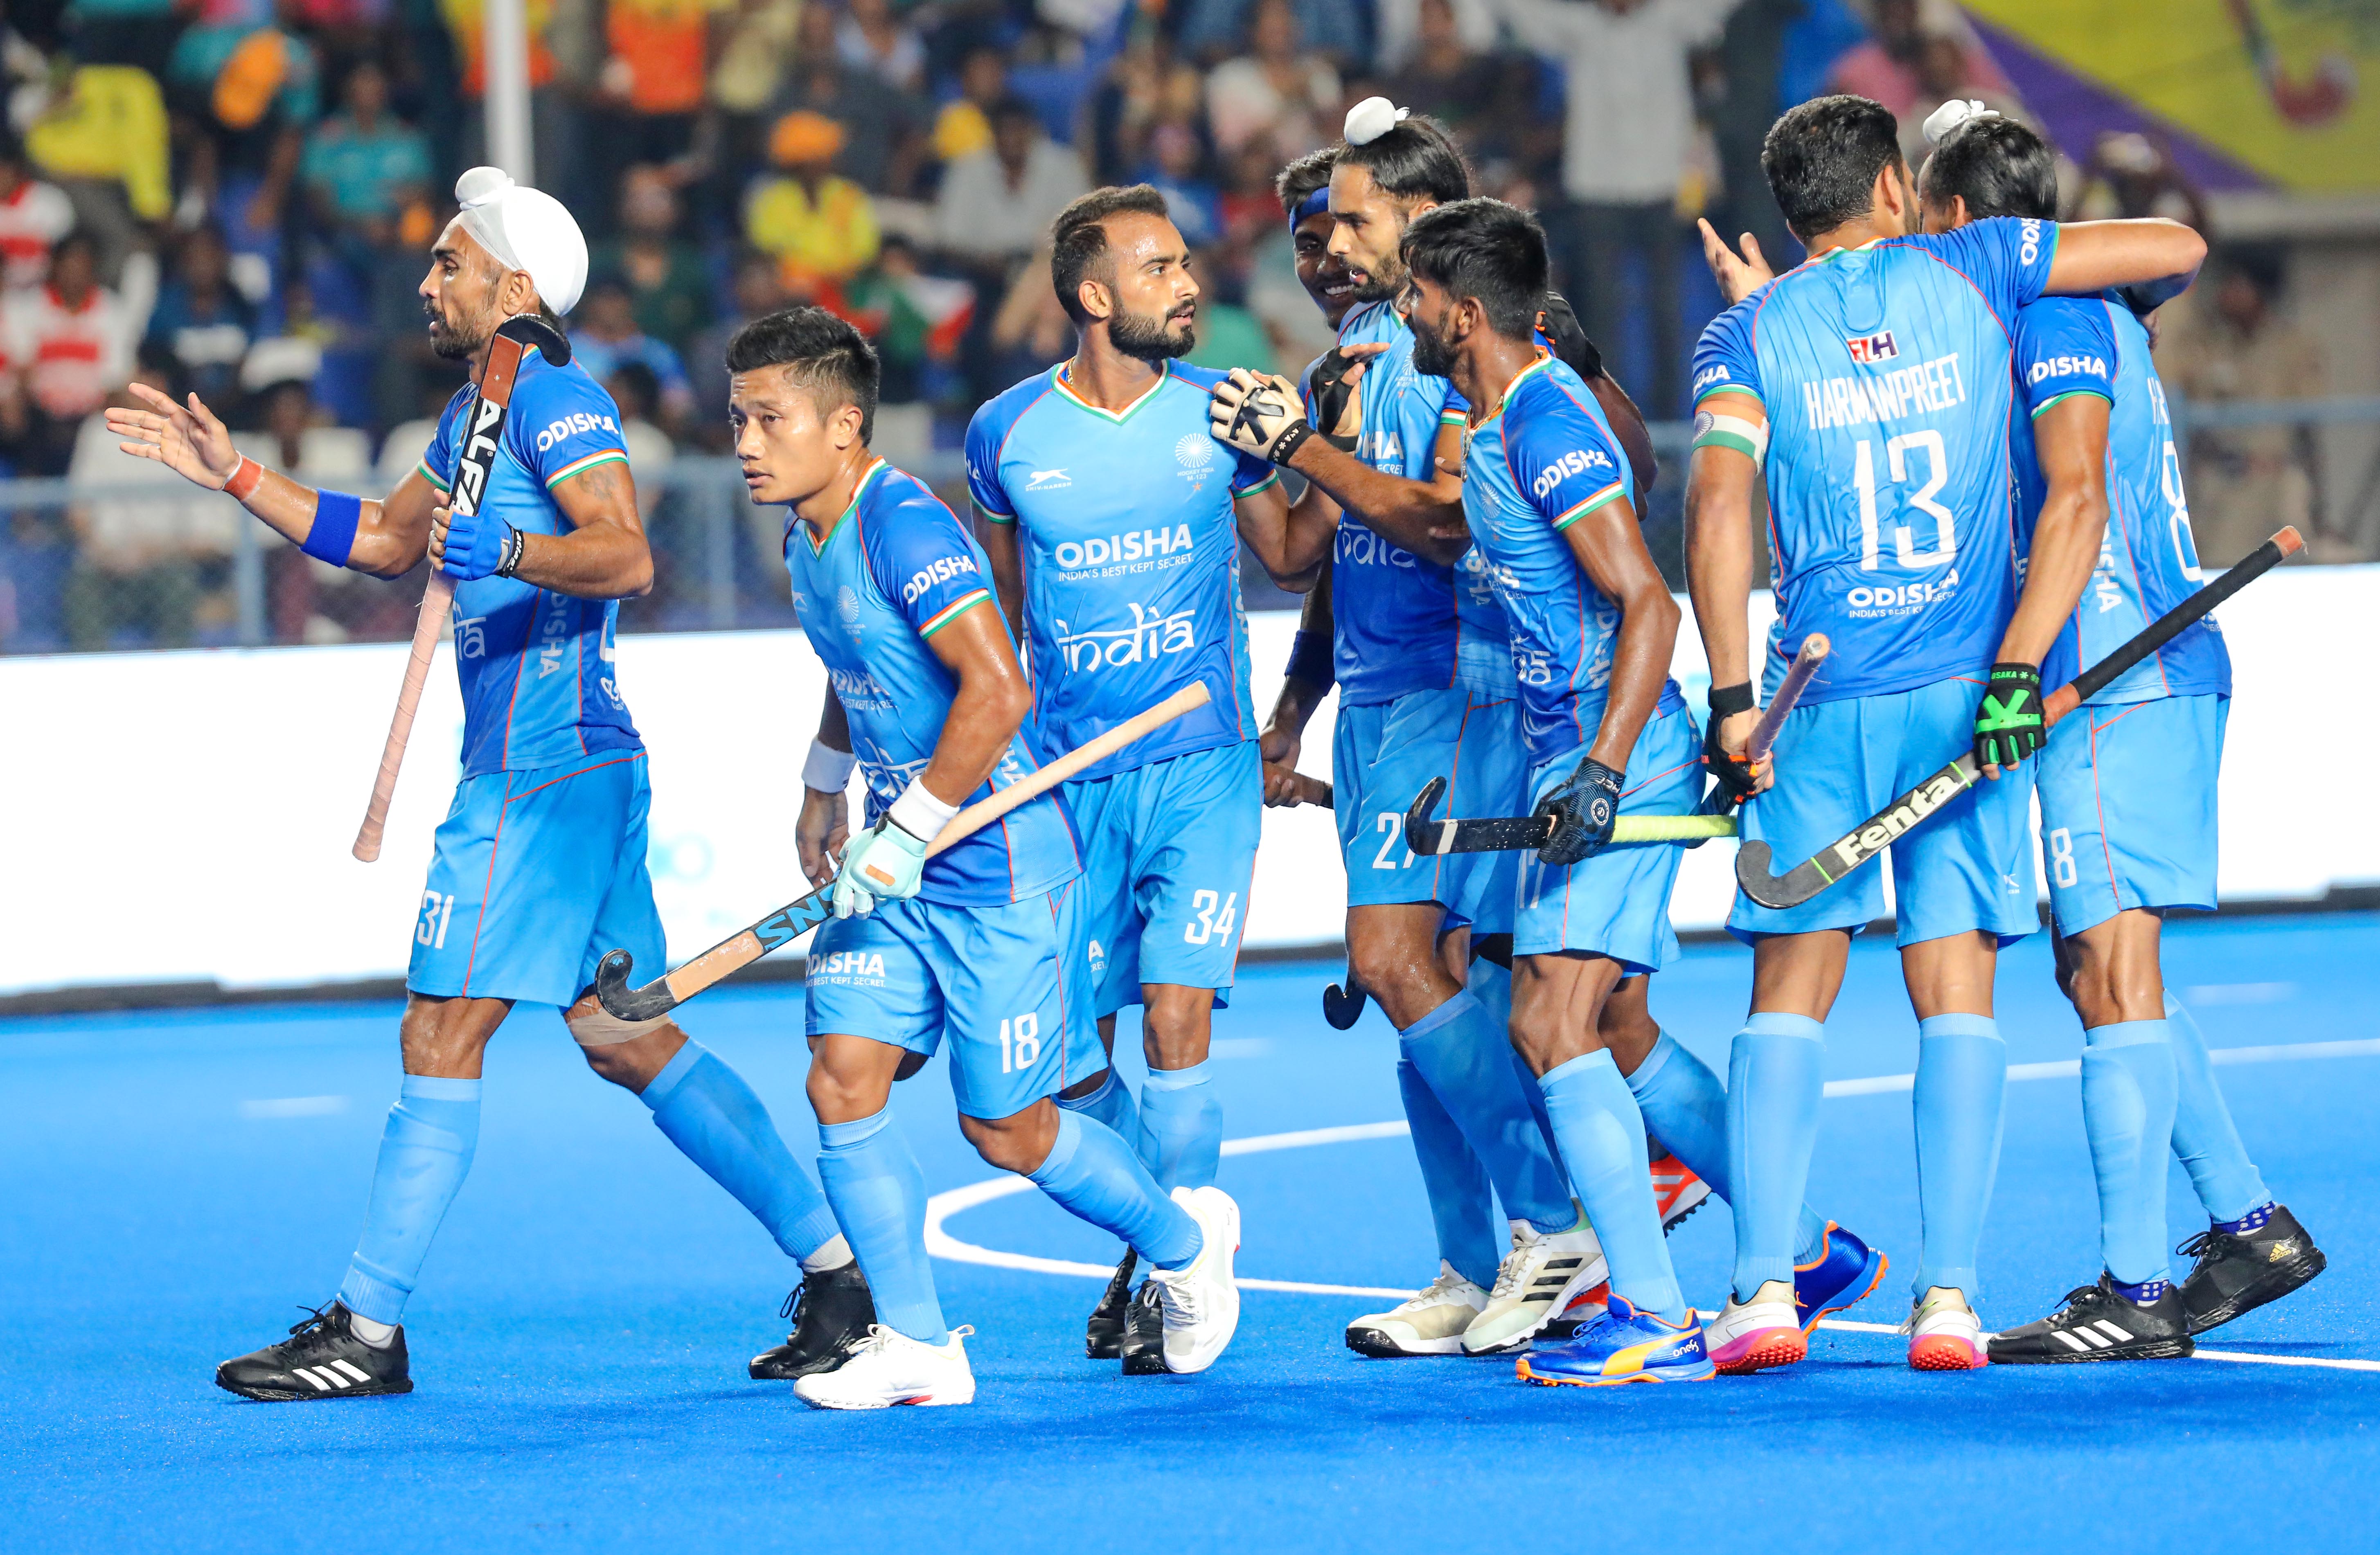 India face Malaysia at 8.30 PM in final